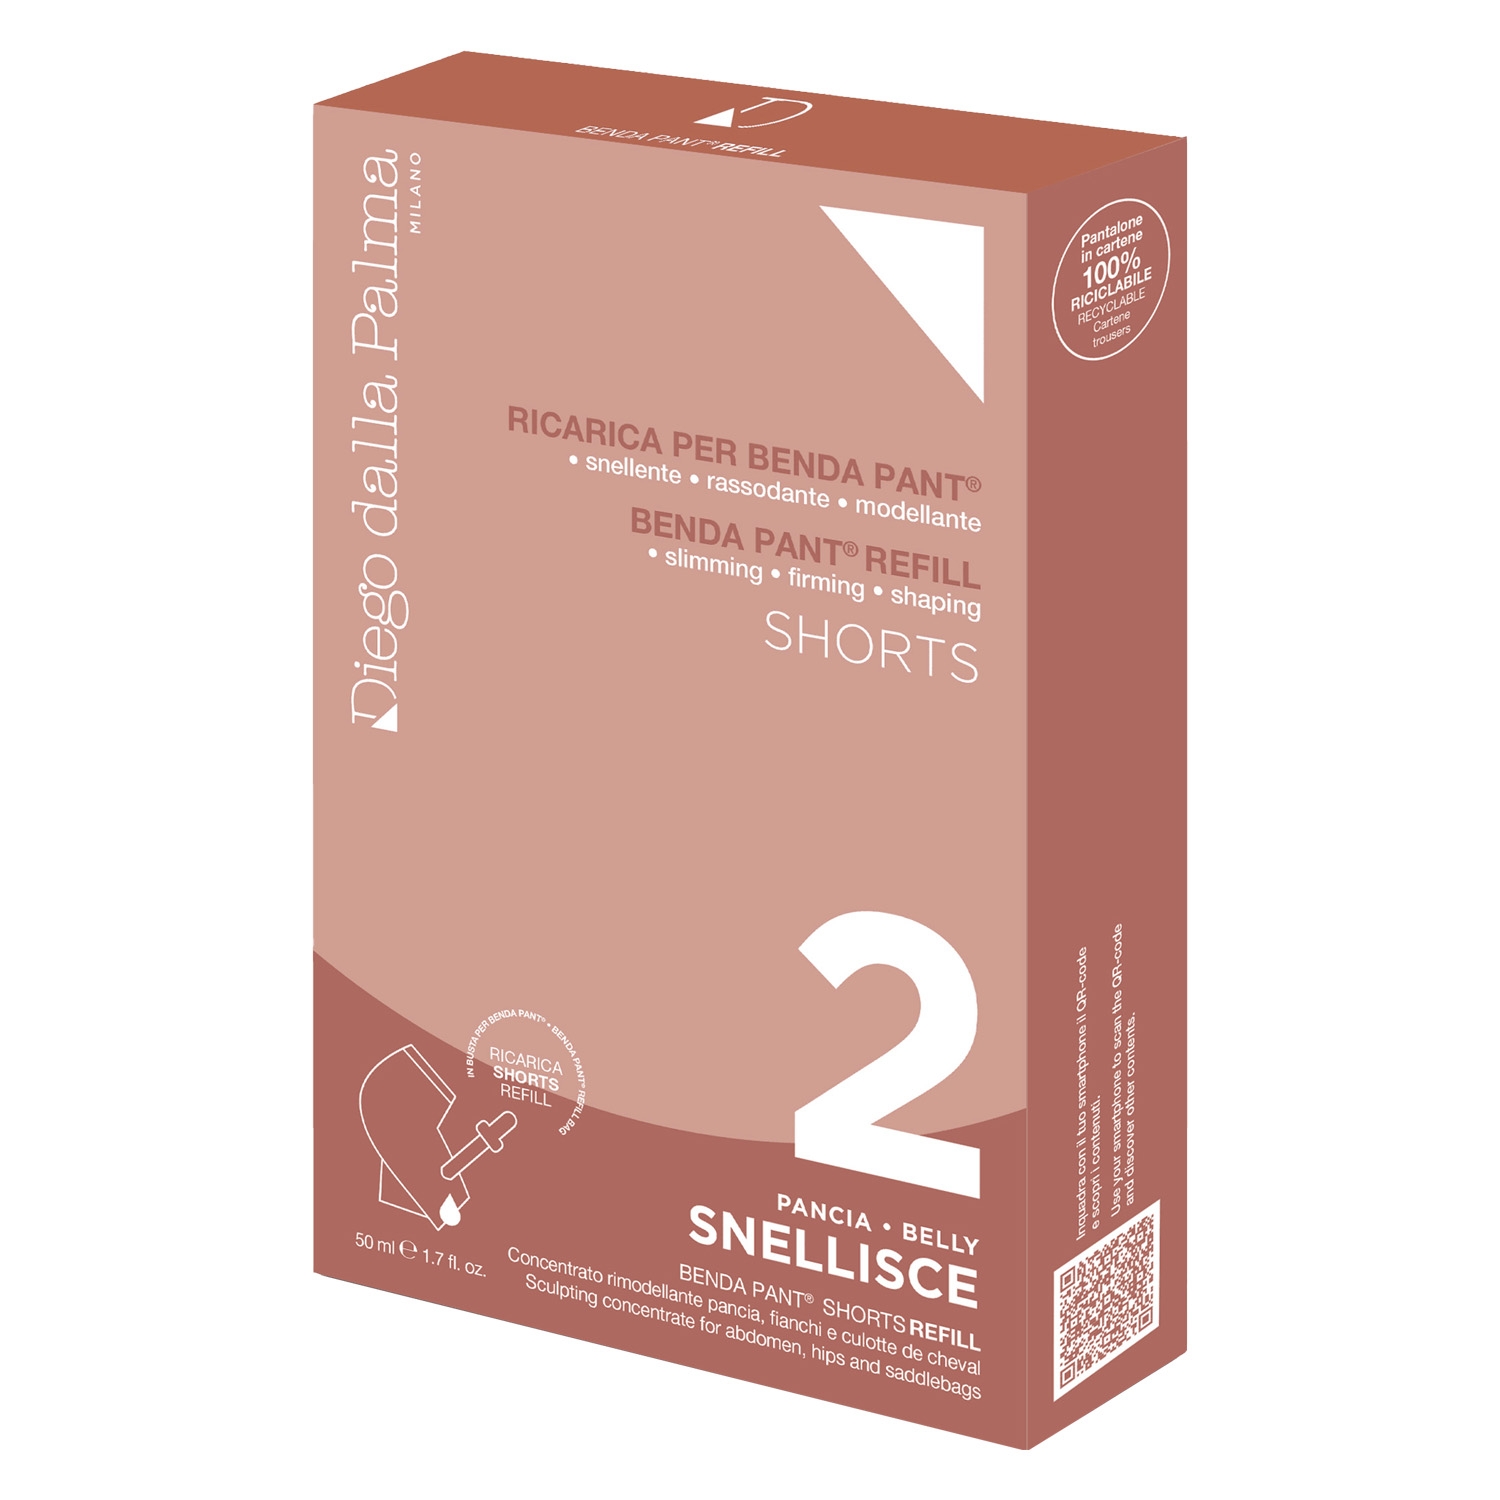 Product image from Diego dalla Palma - 2. SNELLISCE BENDA PANT SHORTS Sculpting shorts REFILL